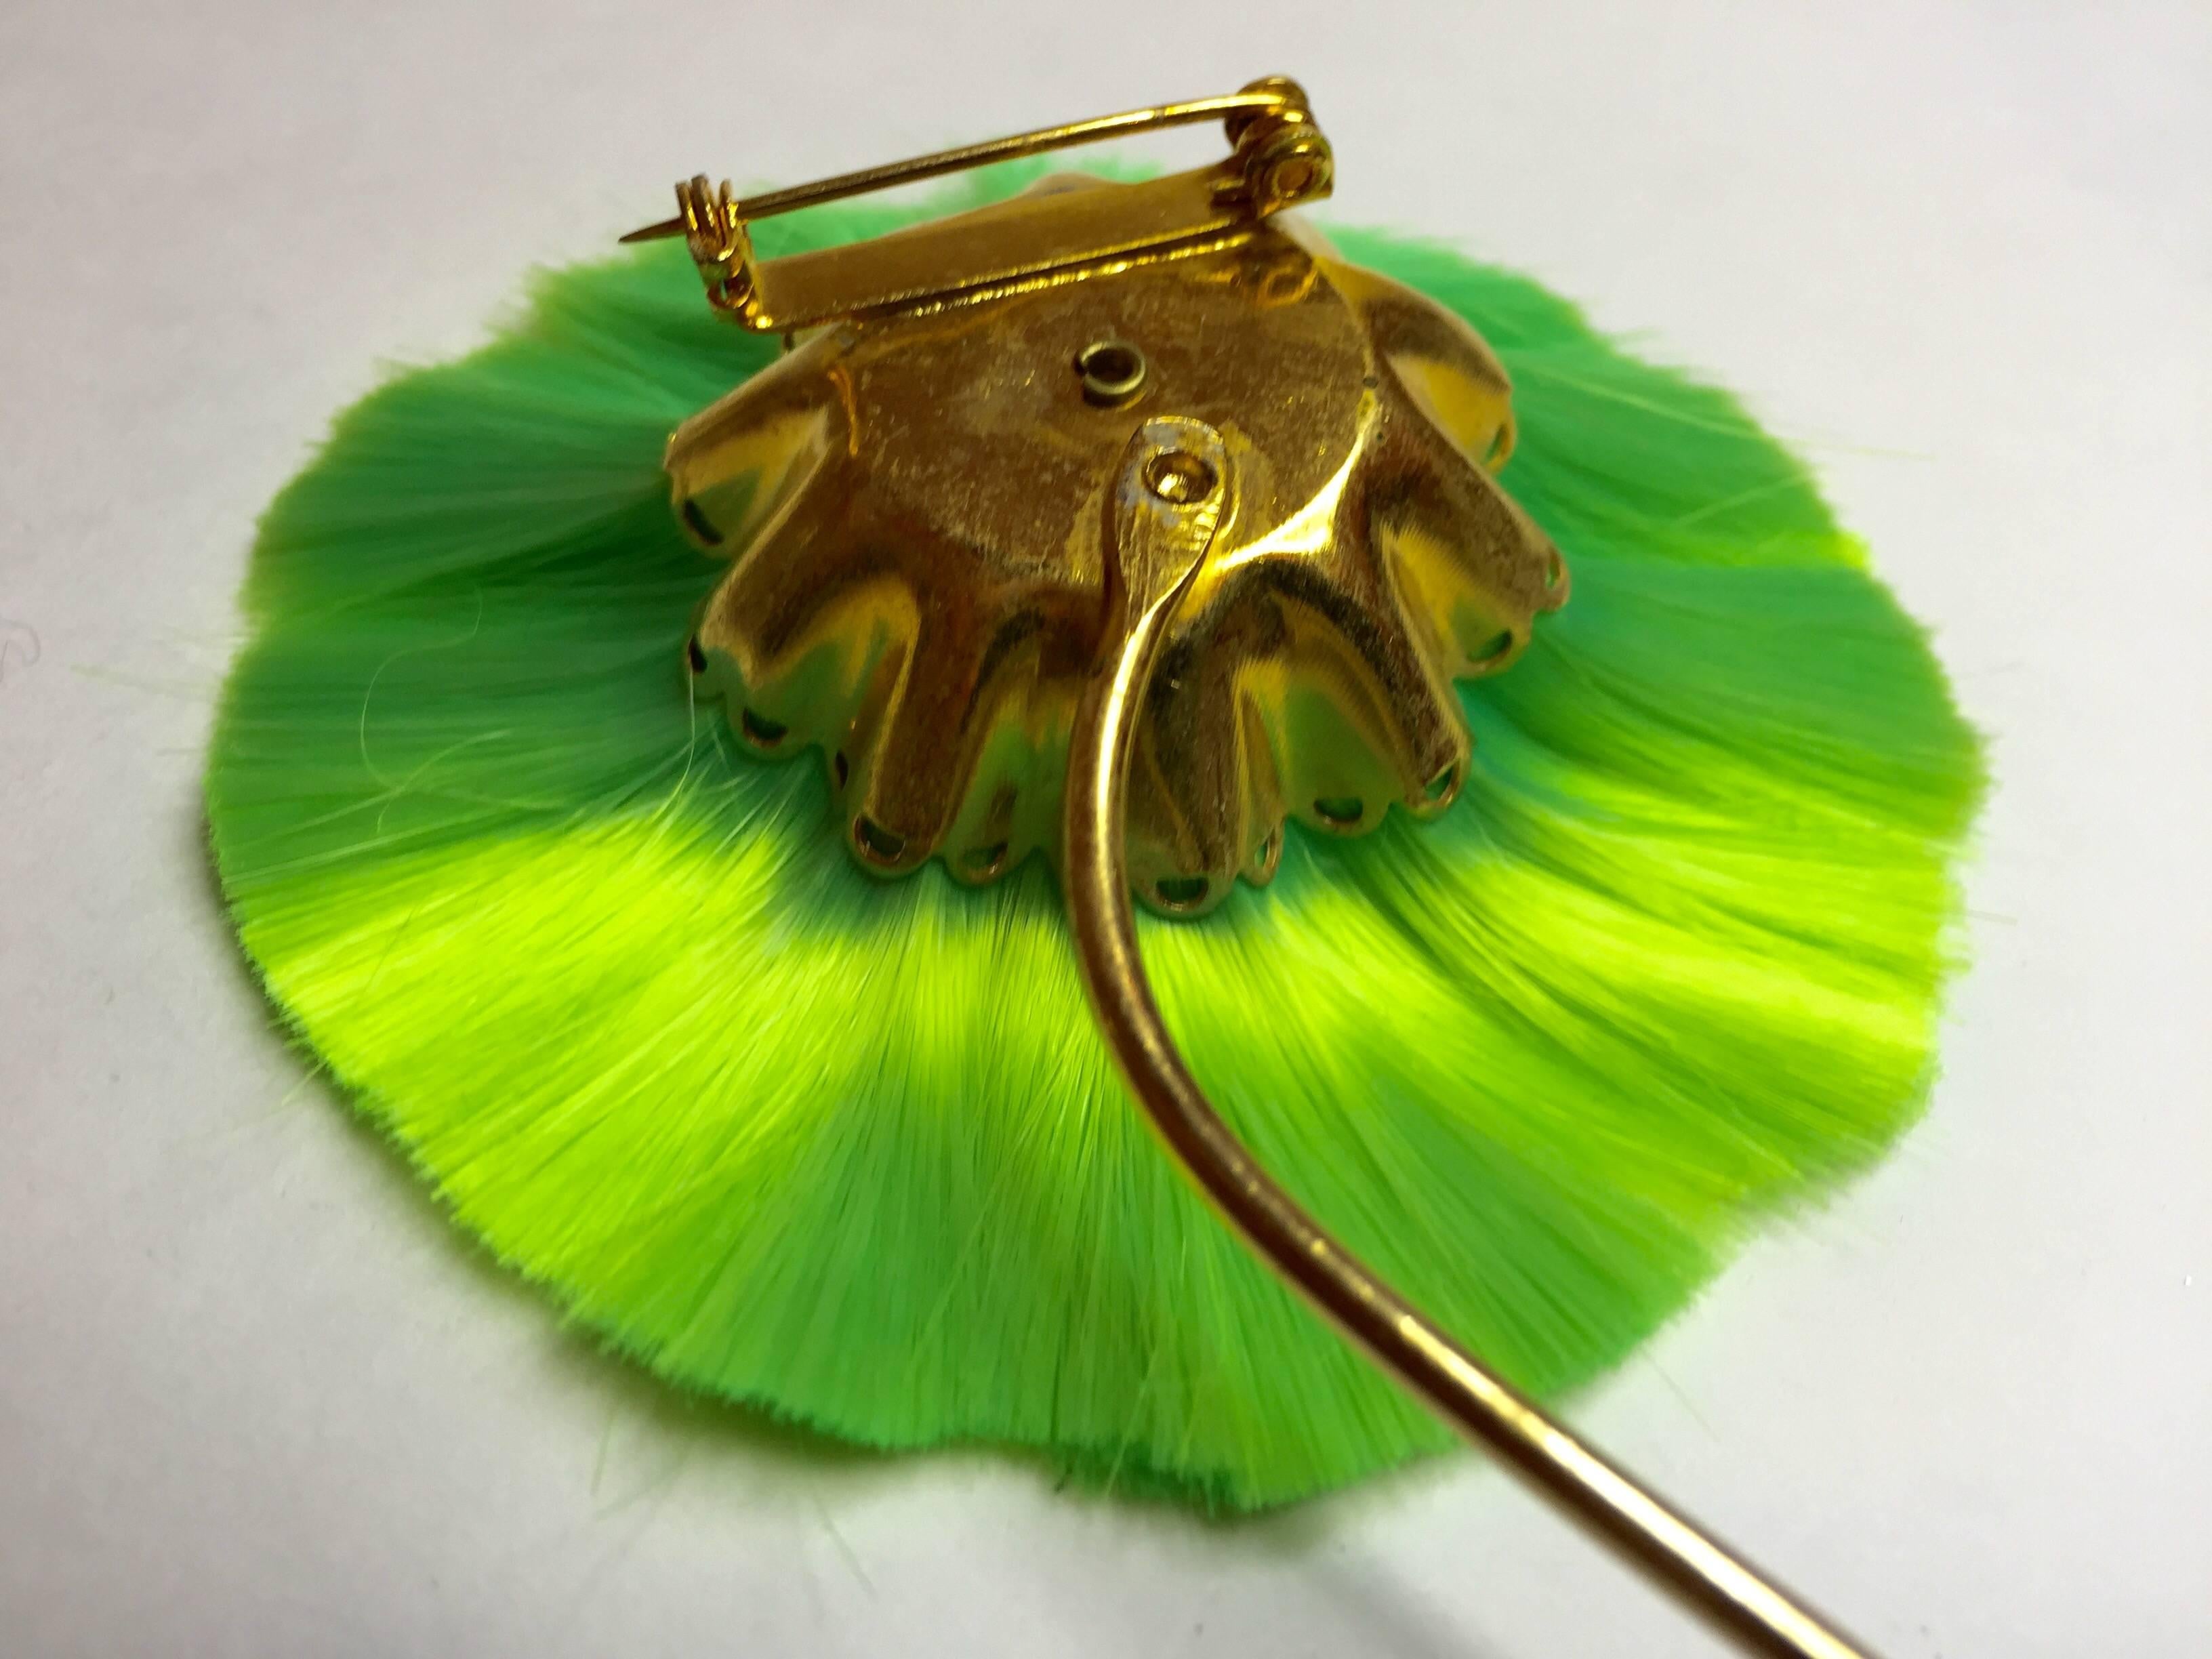 This utterly novel and highly amusing fiber flower whiskbroom stylee pin is by designer Hattie Carnegie. This size is approximately 2 inches across, the blossom, with a three inch long extra stem making for a rather large and important statement